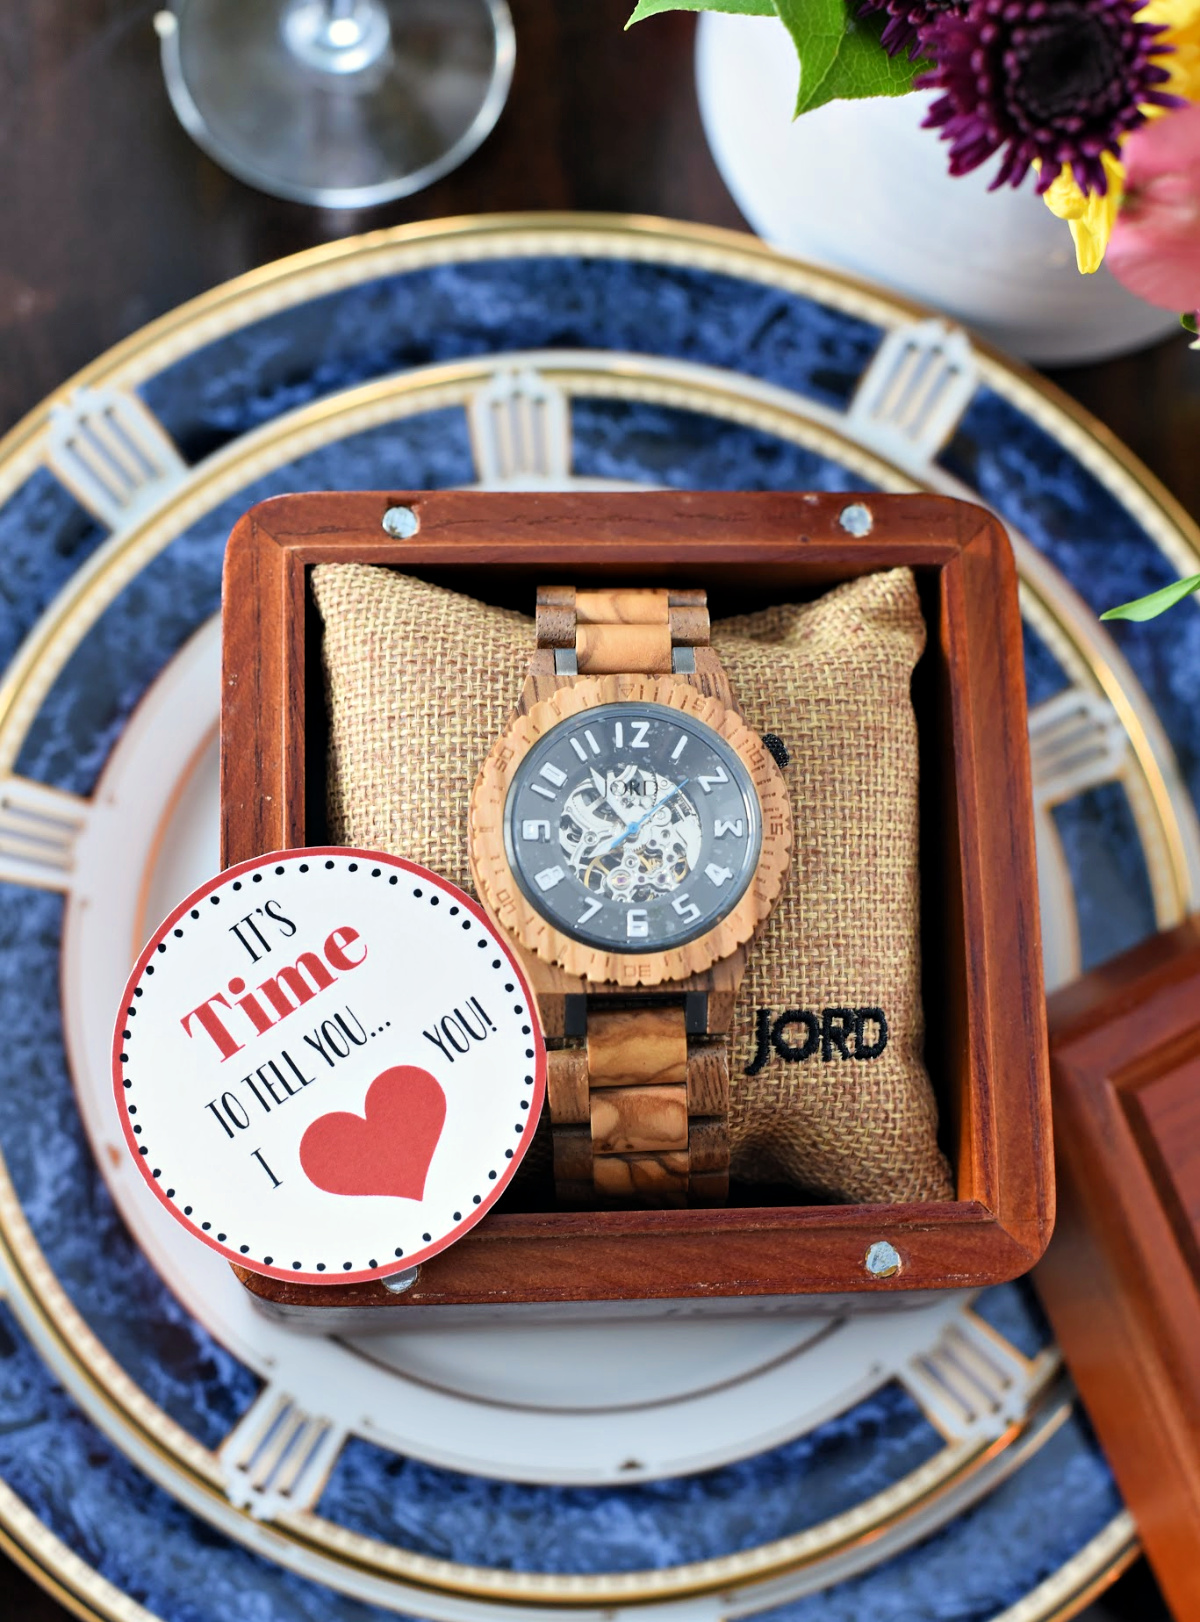 Simple Anniversary Gift for Him or Valentine's Gift Idea-Grab a beautiful watch and add this tag for a sweet and thoughtful anniversary gift for him. #anniversarygiftforhim #anniversarygifts #valentinesgiftforhim #valentinesgifts